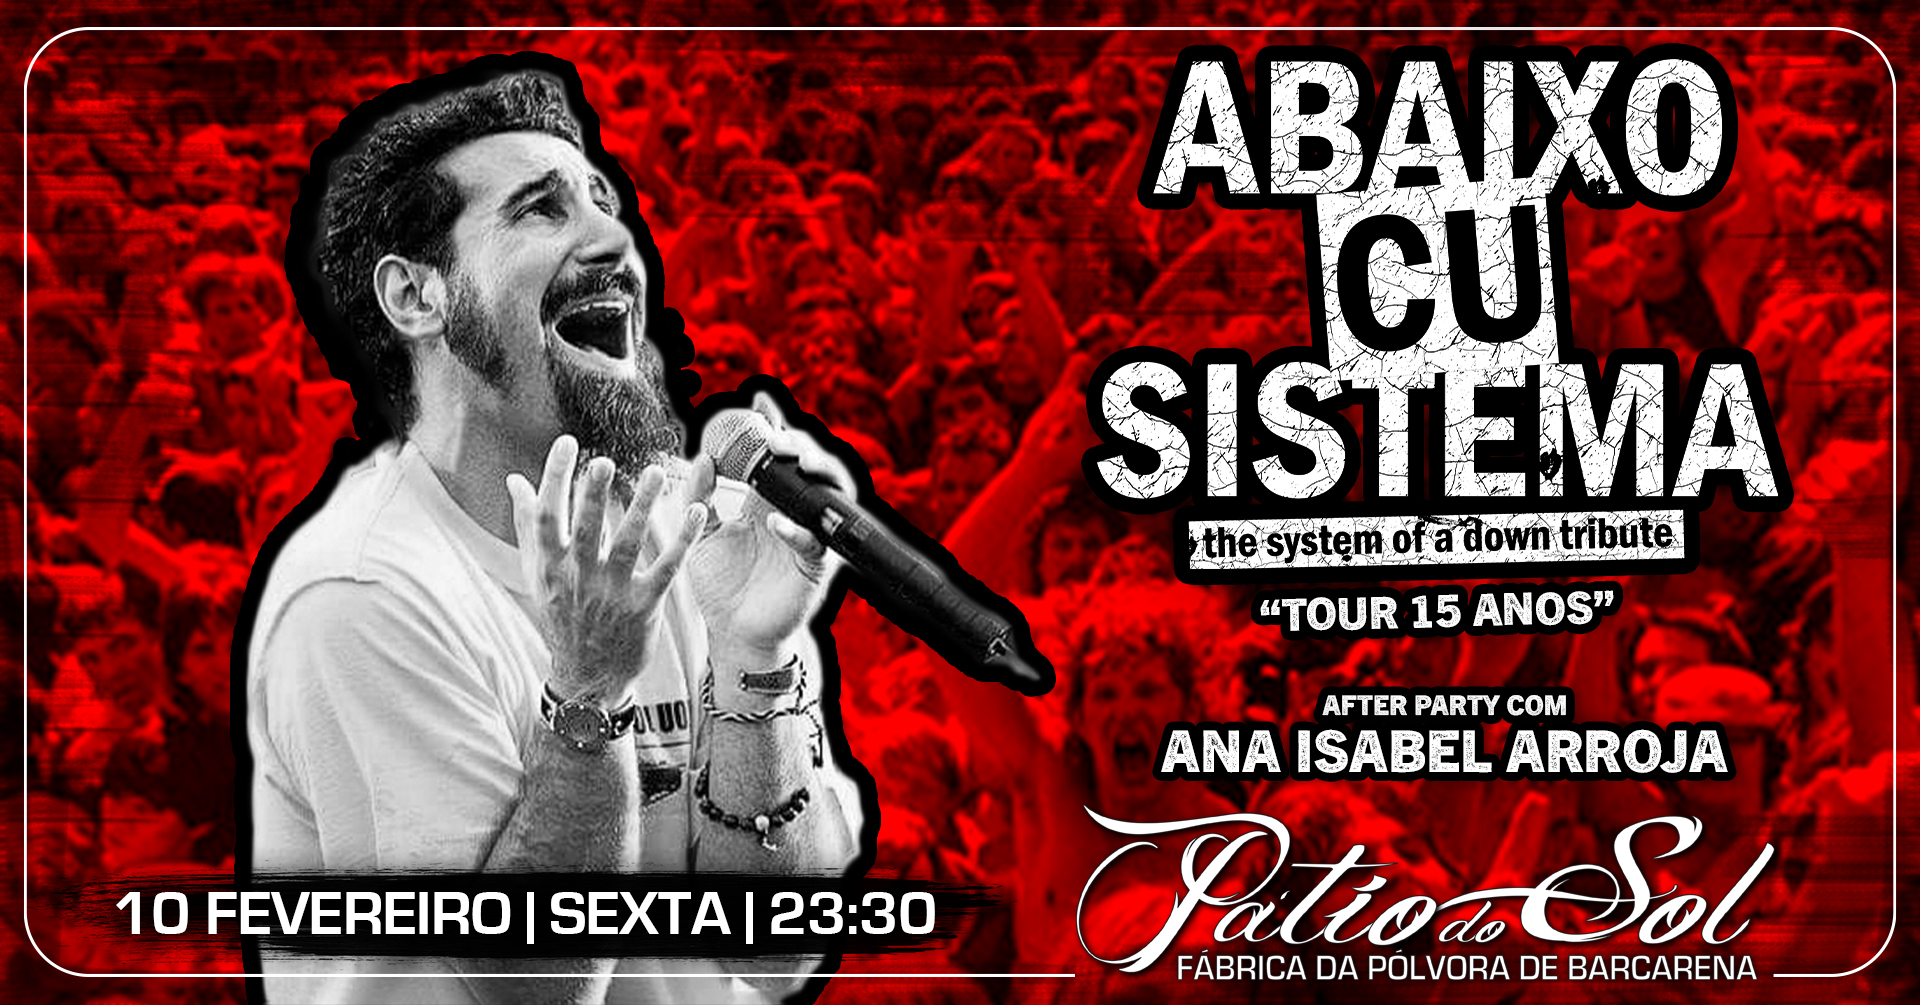 Abaixo Cu Sistema - Trib. System Of A Down | After Party com Ana Isabel Arroja